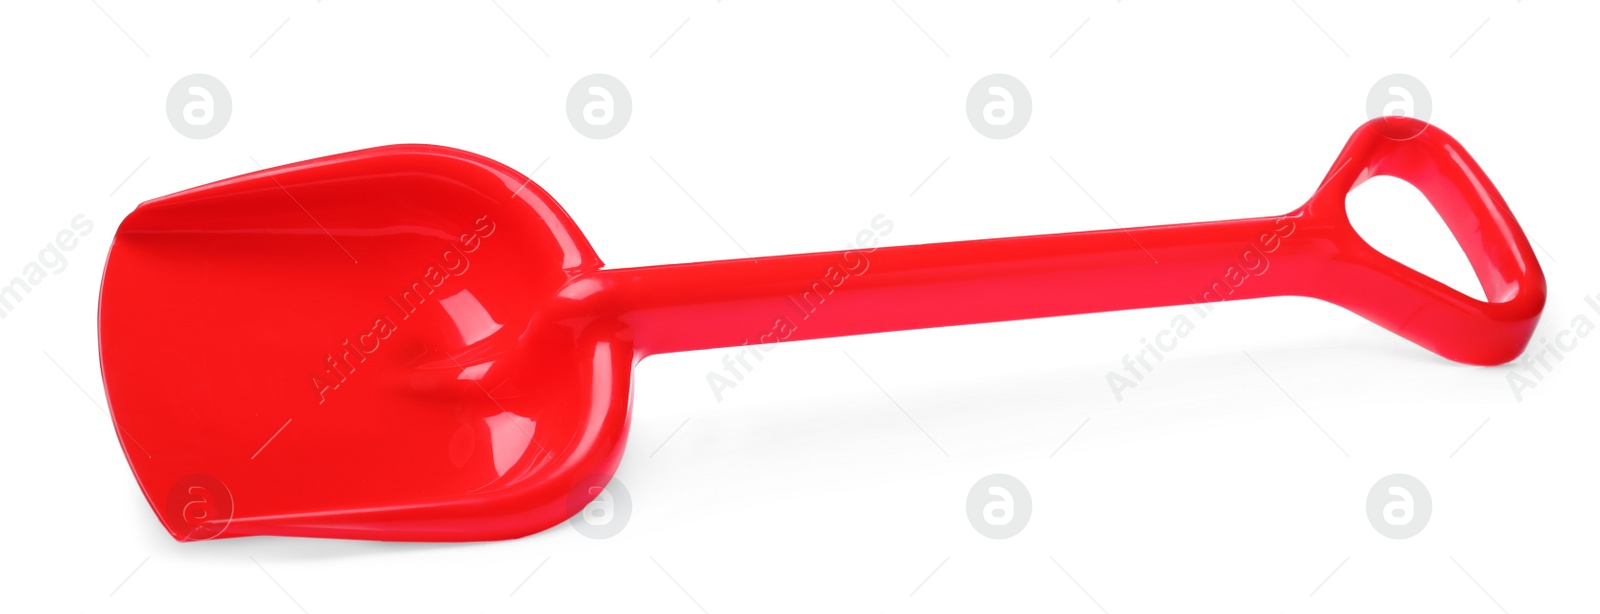 Photo of Red plastic toy shovel isolated on white